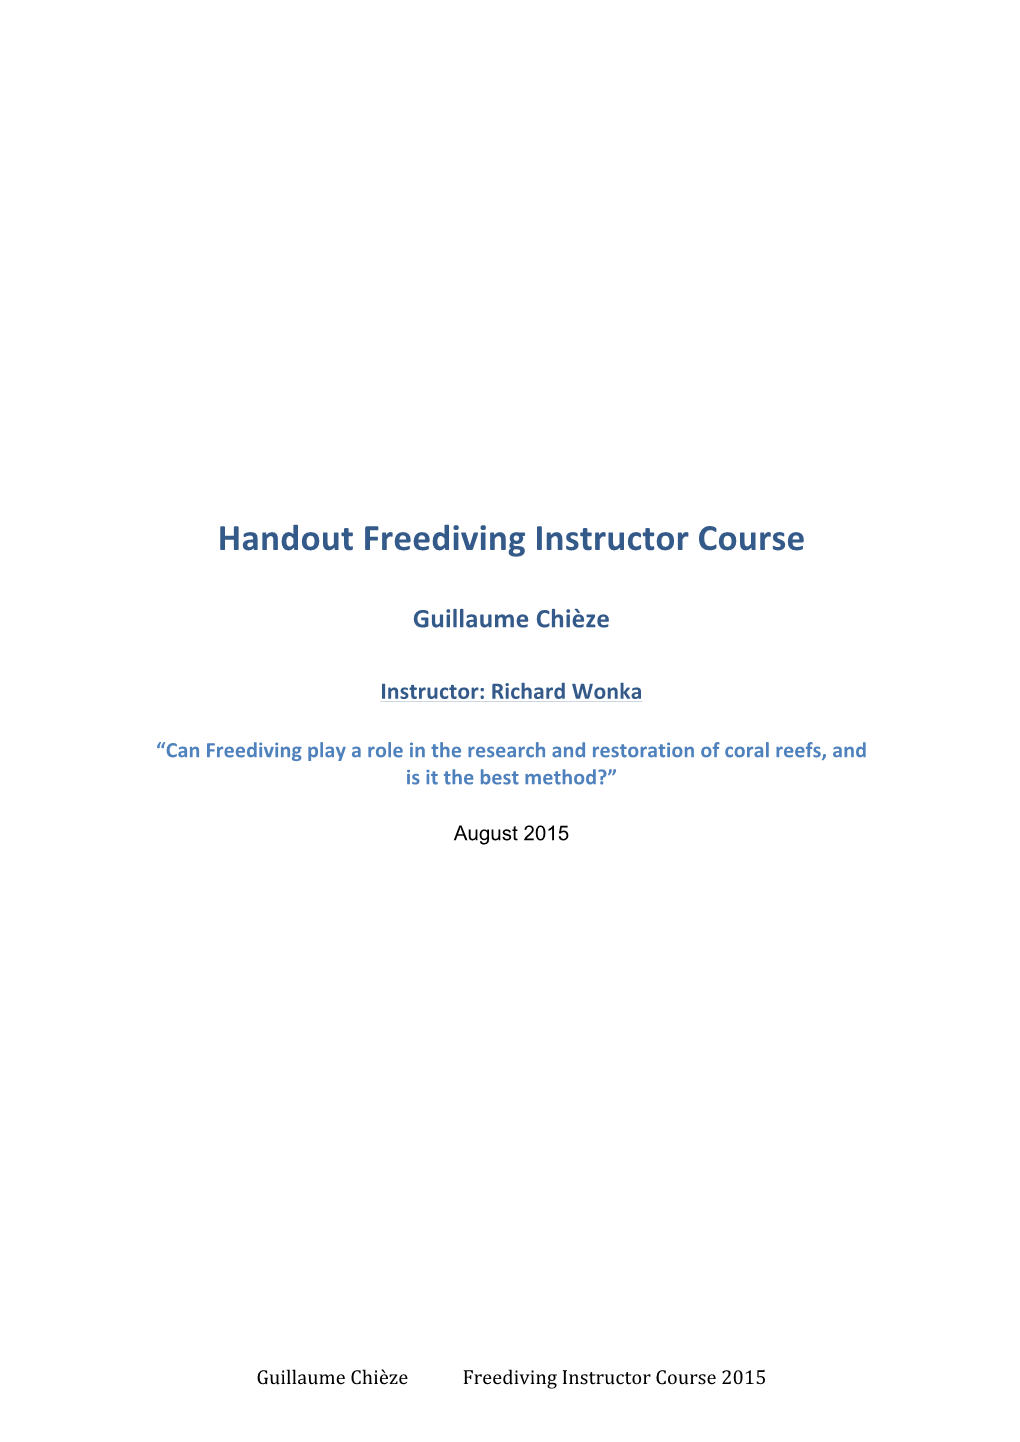 Handout Freediving Instructor Course